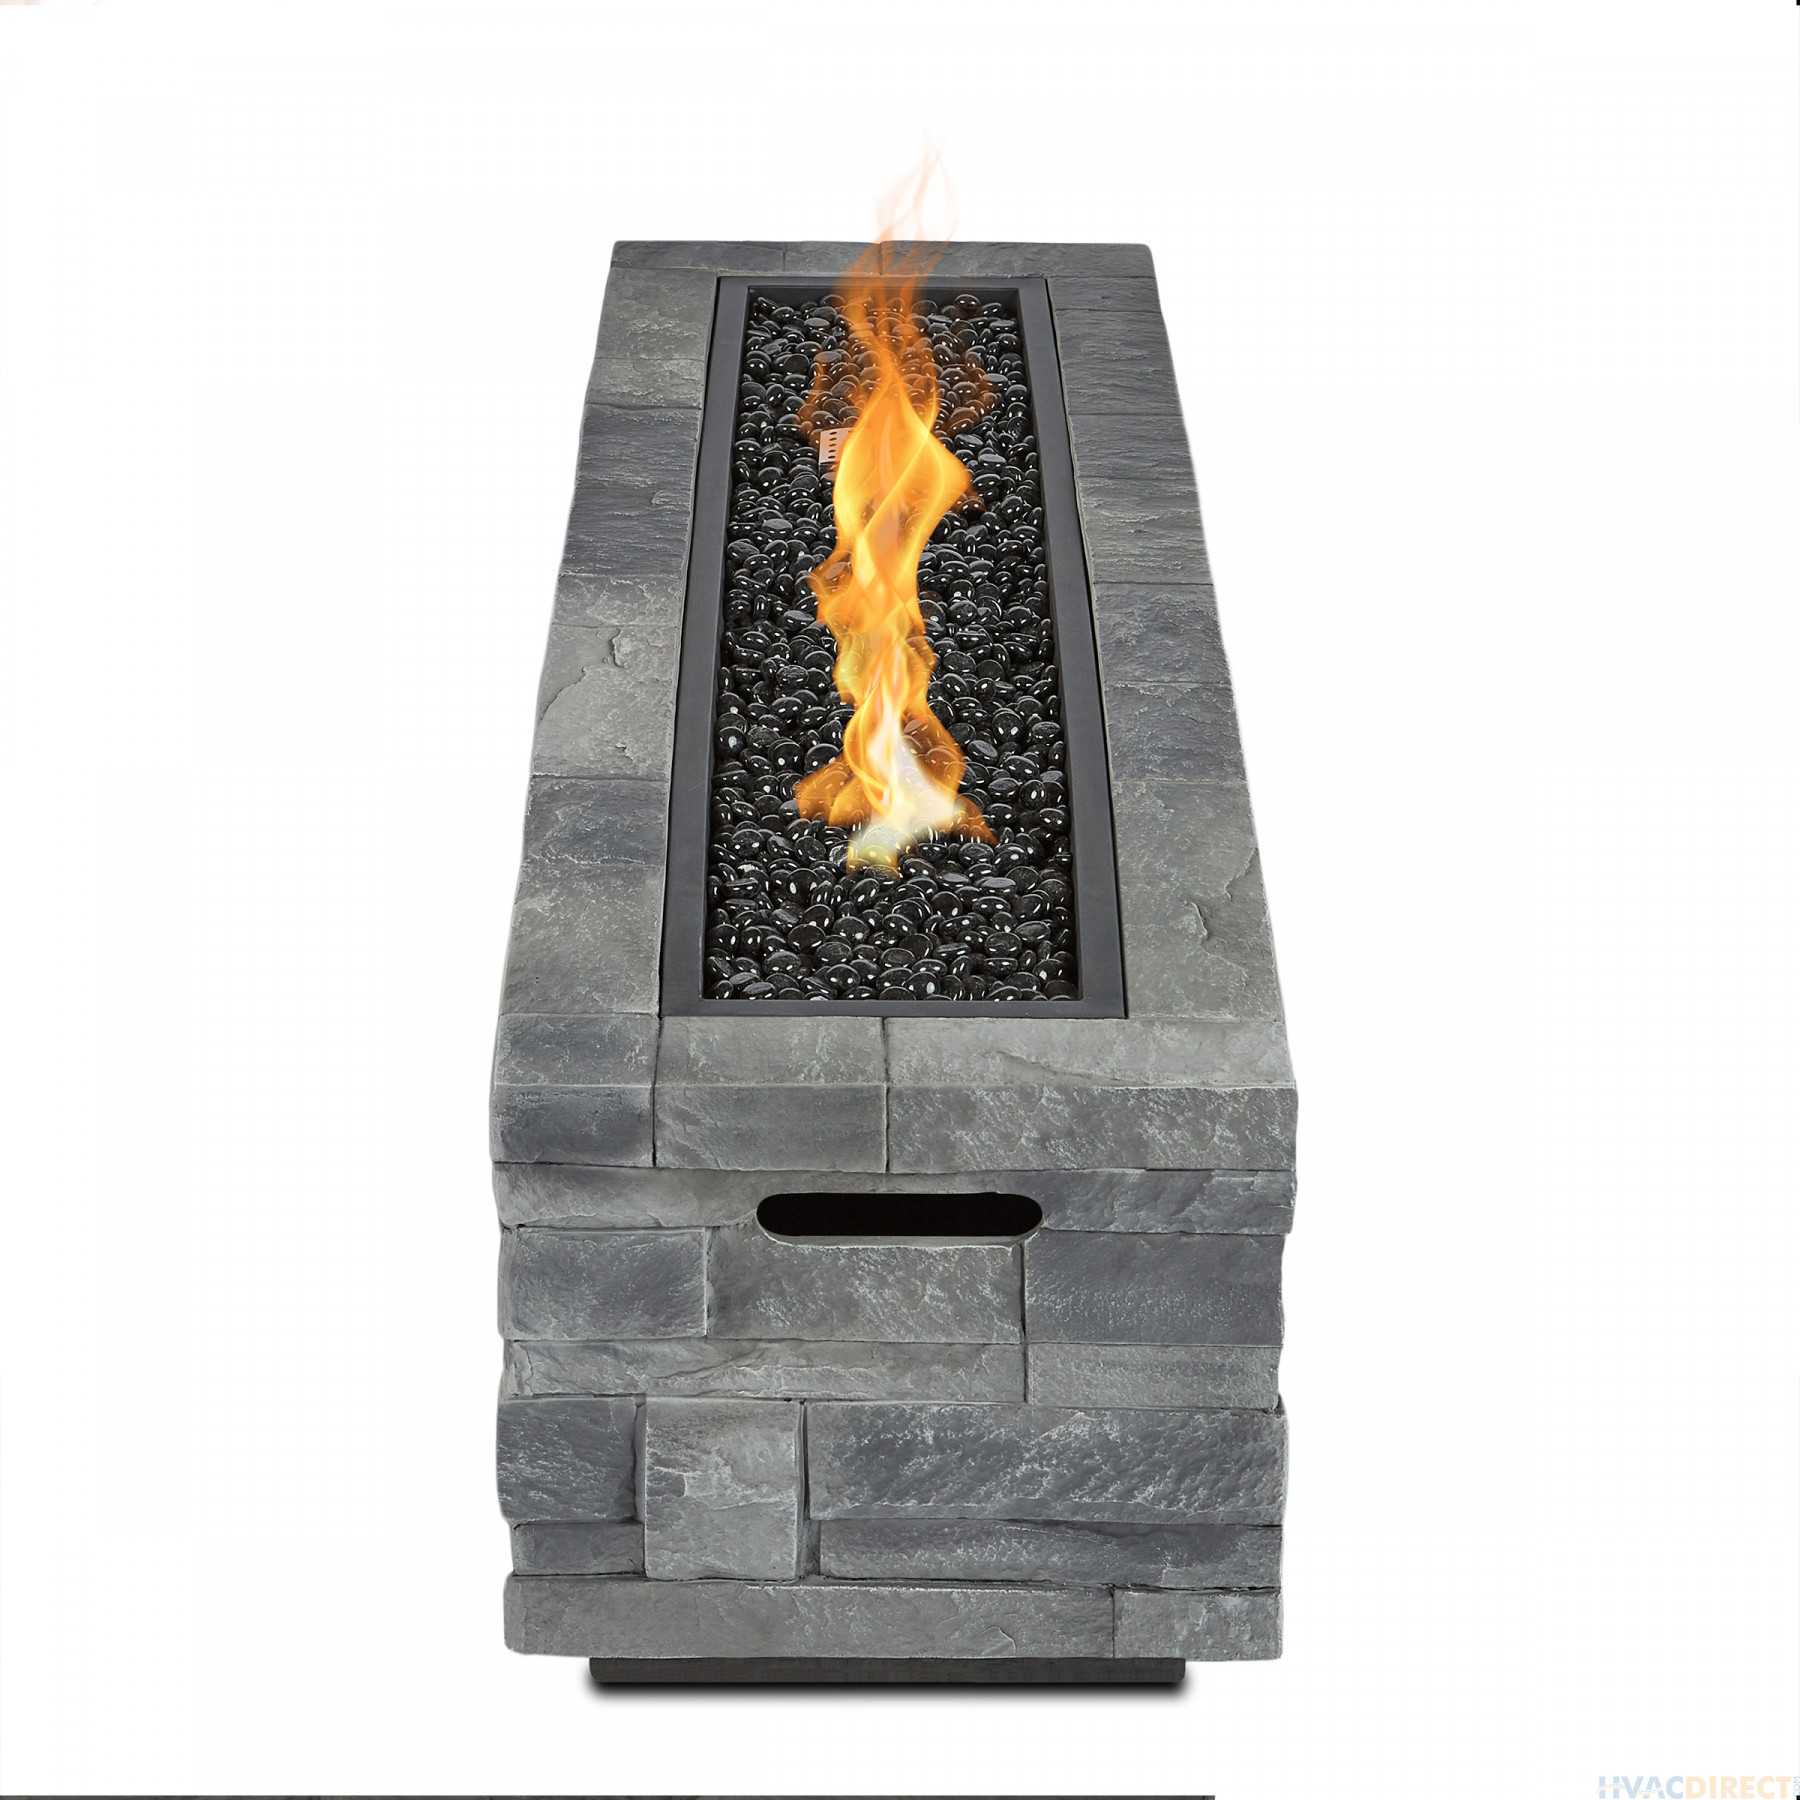 Real Flame Gray Ledgestone Rectangular Propane Fire Pit With Natural Gas Conversion Kit - CT0003LP-GLS